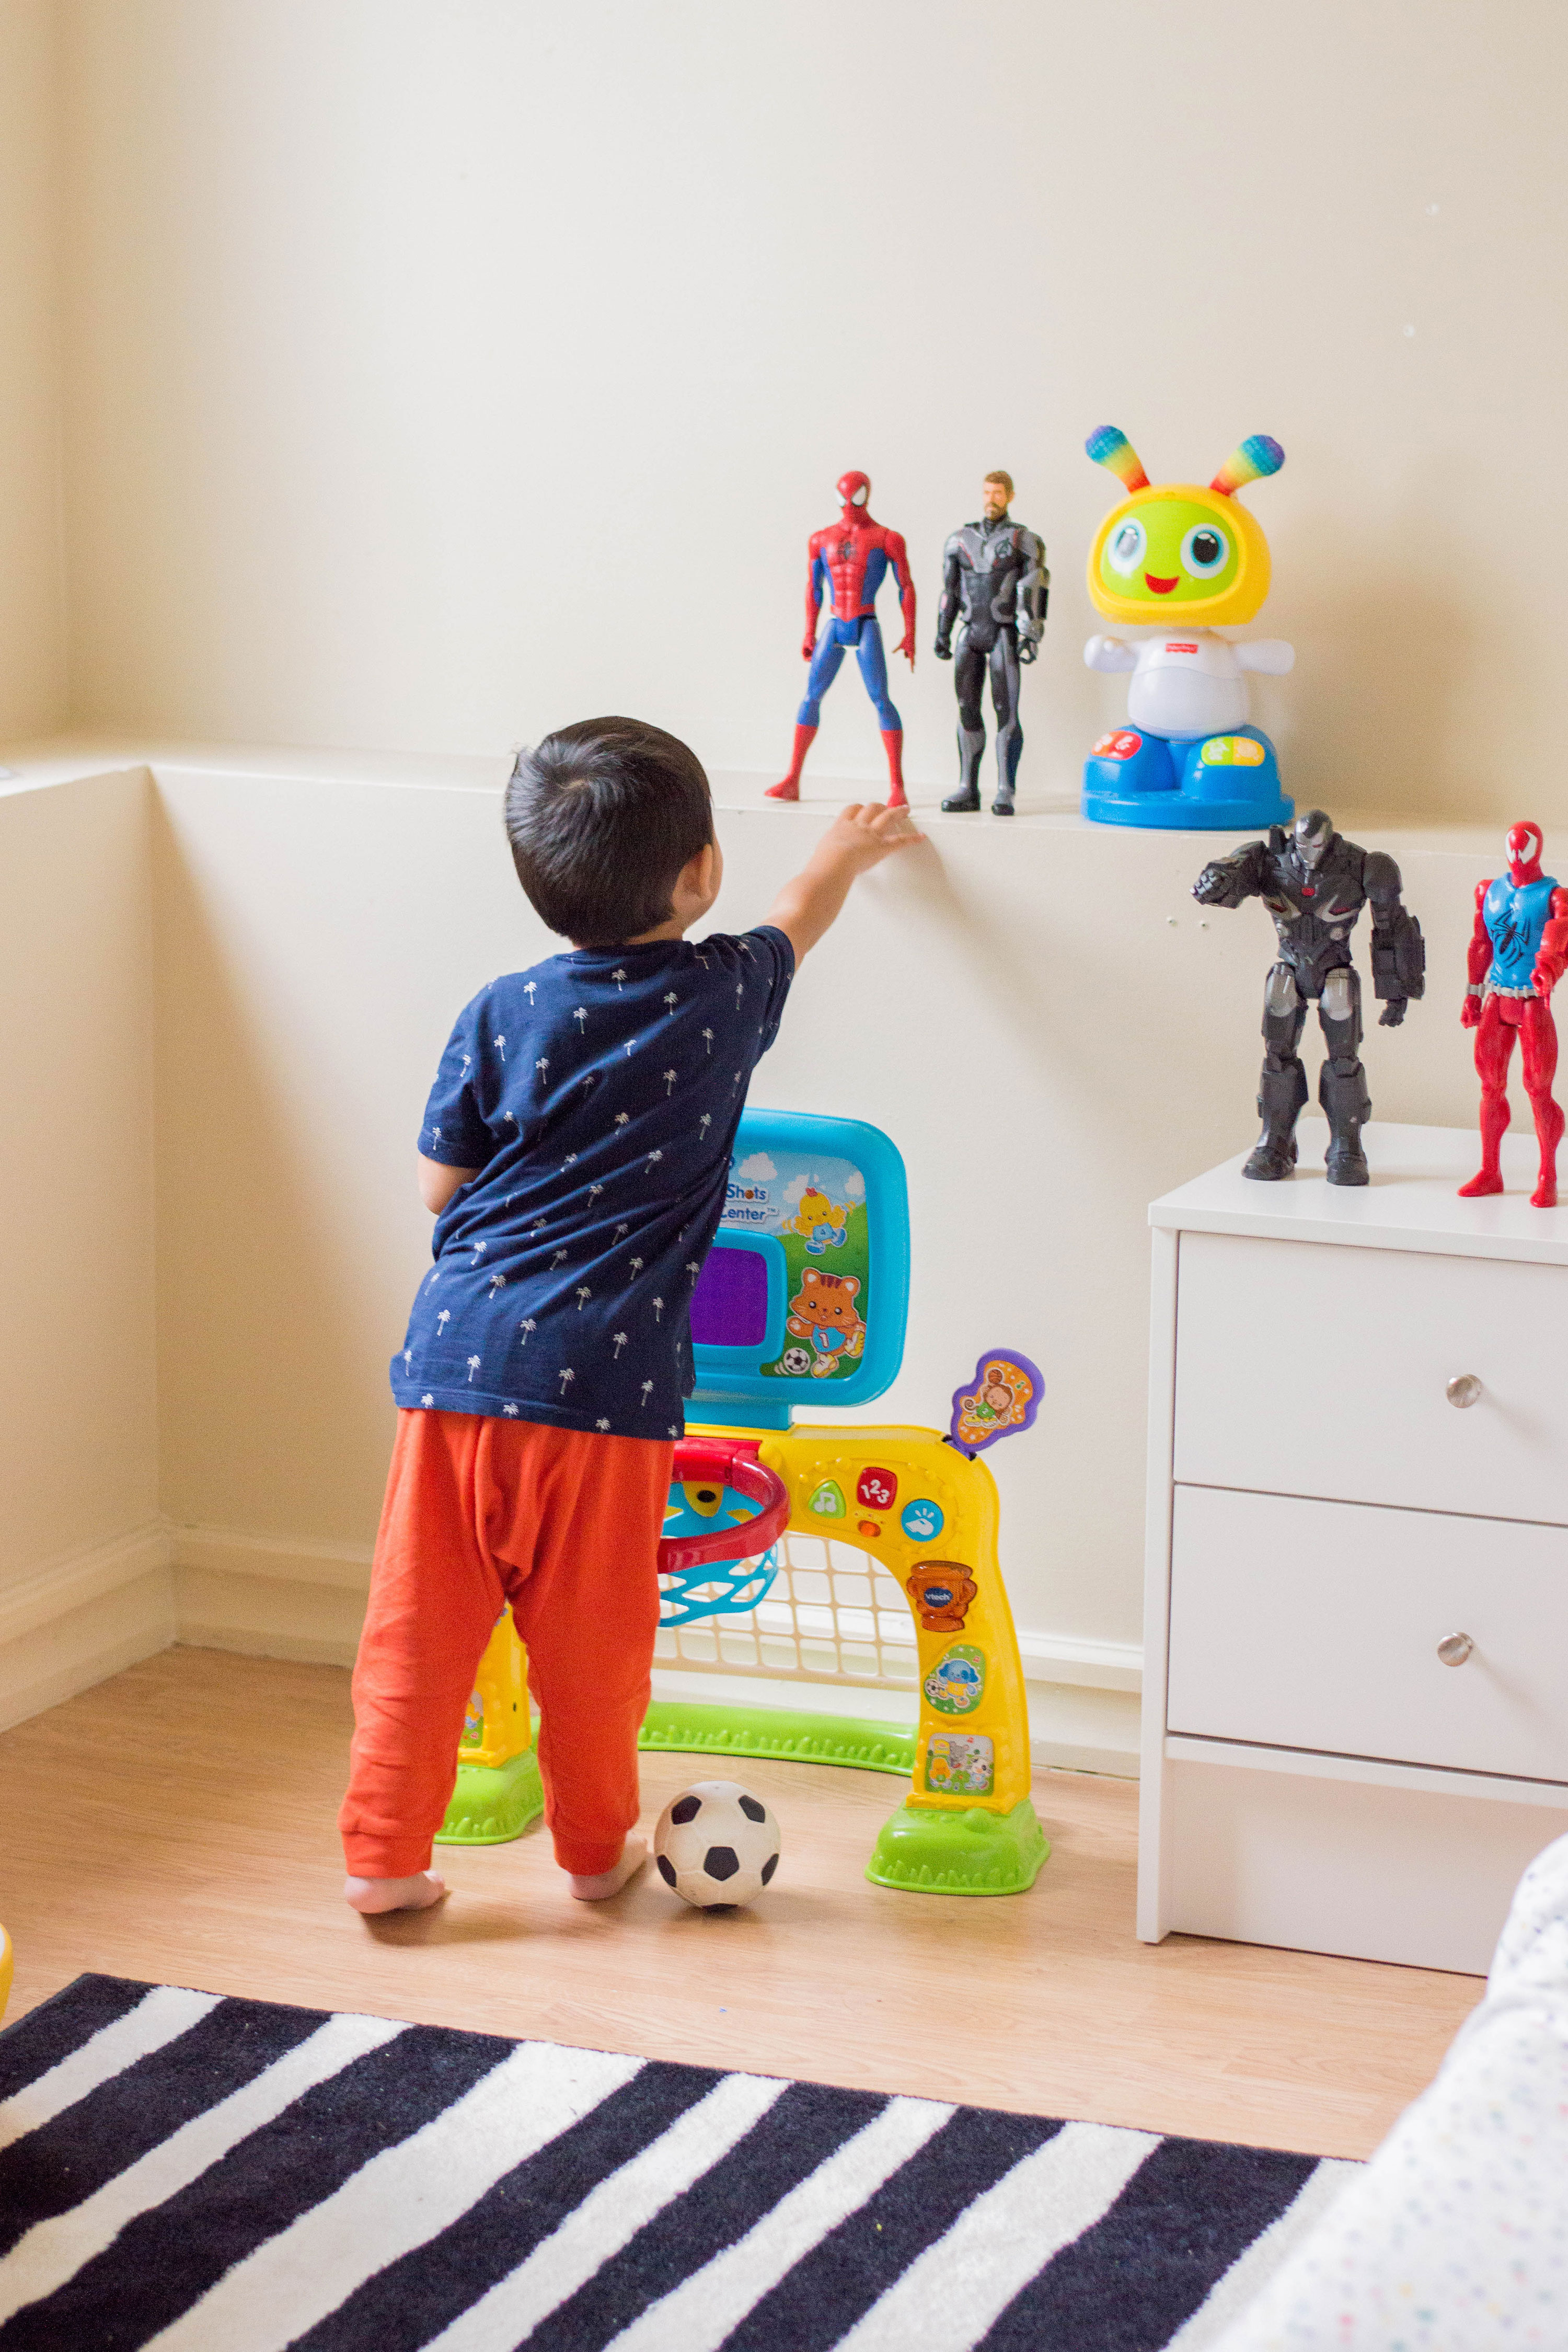 Here are (in our toy-loving opinion) some of the best toddler toys out there. Check out our list and get inspired for your little one - it's play time! #besttoddlertoys #toddlergiftideas